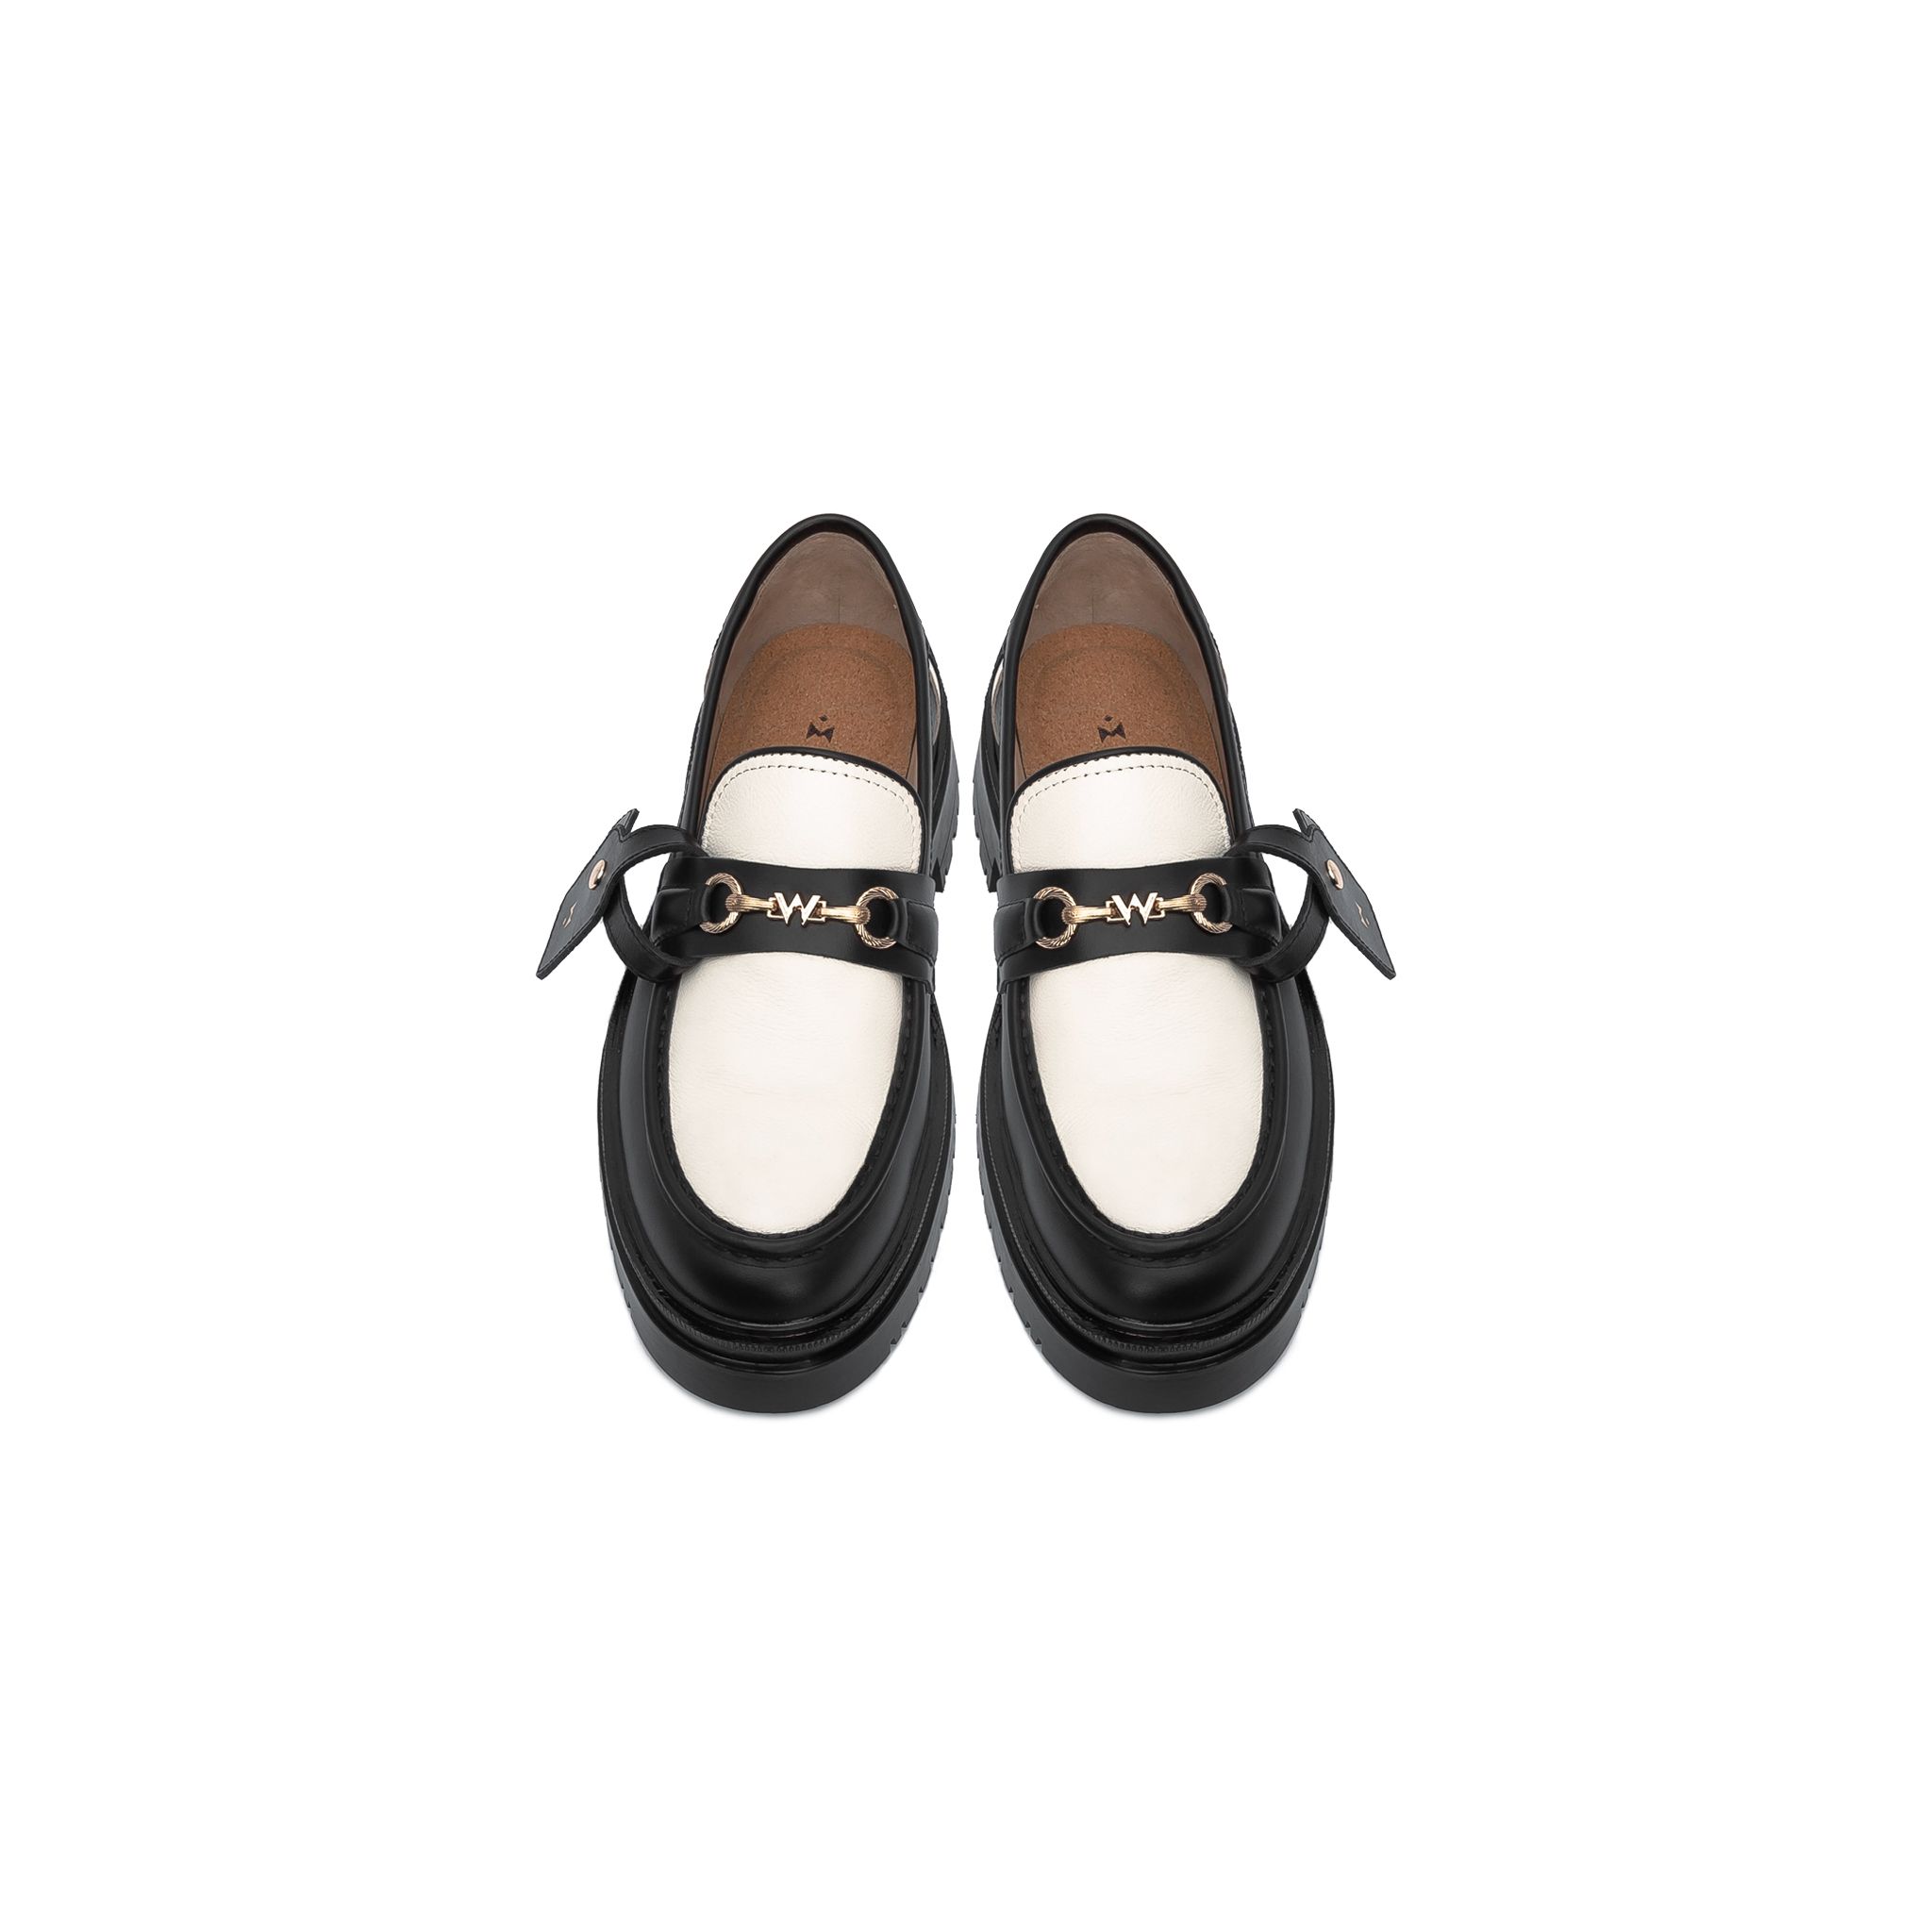  THE SEAN WOLF CHUNKY LOAFER - BLACK OFF WHITE 